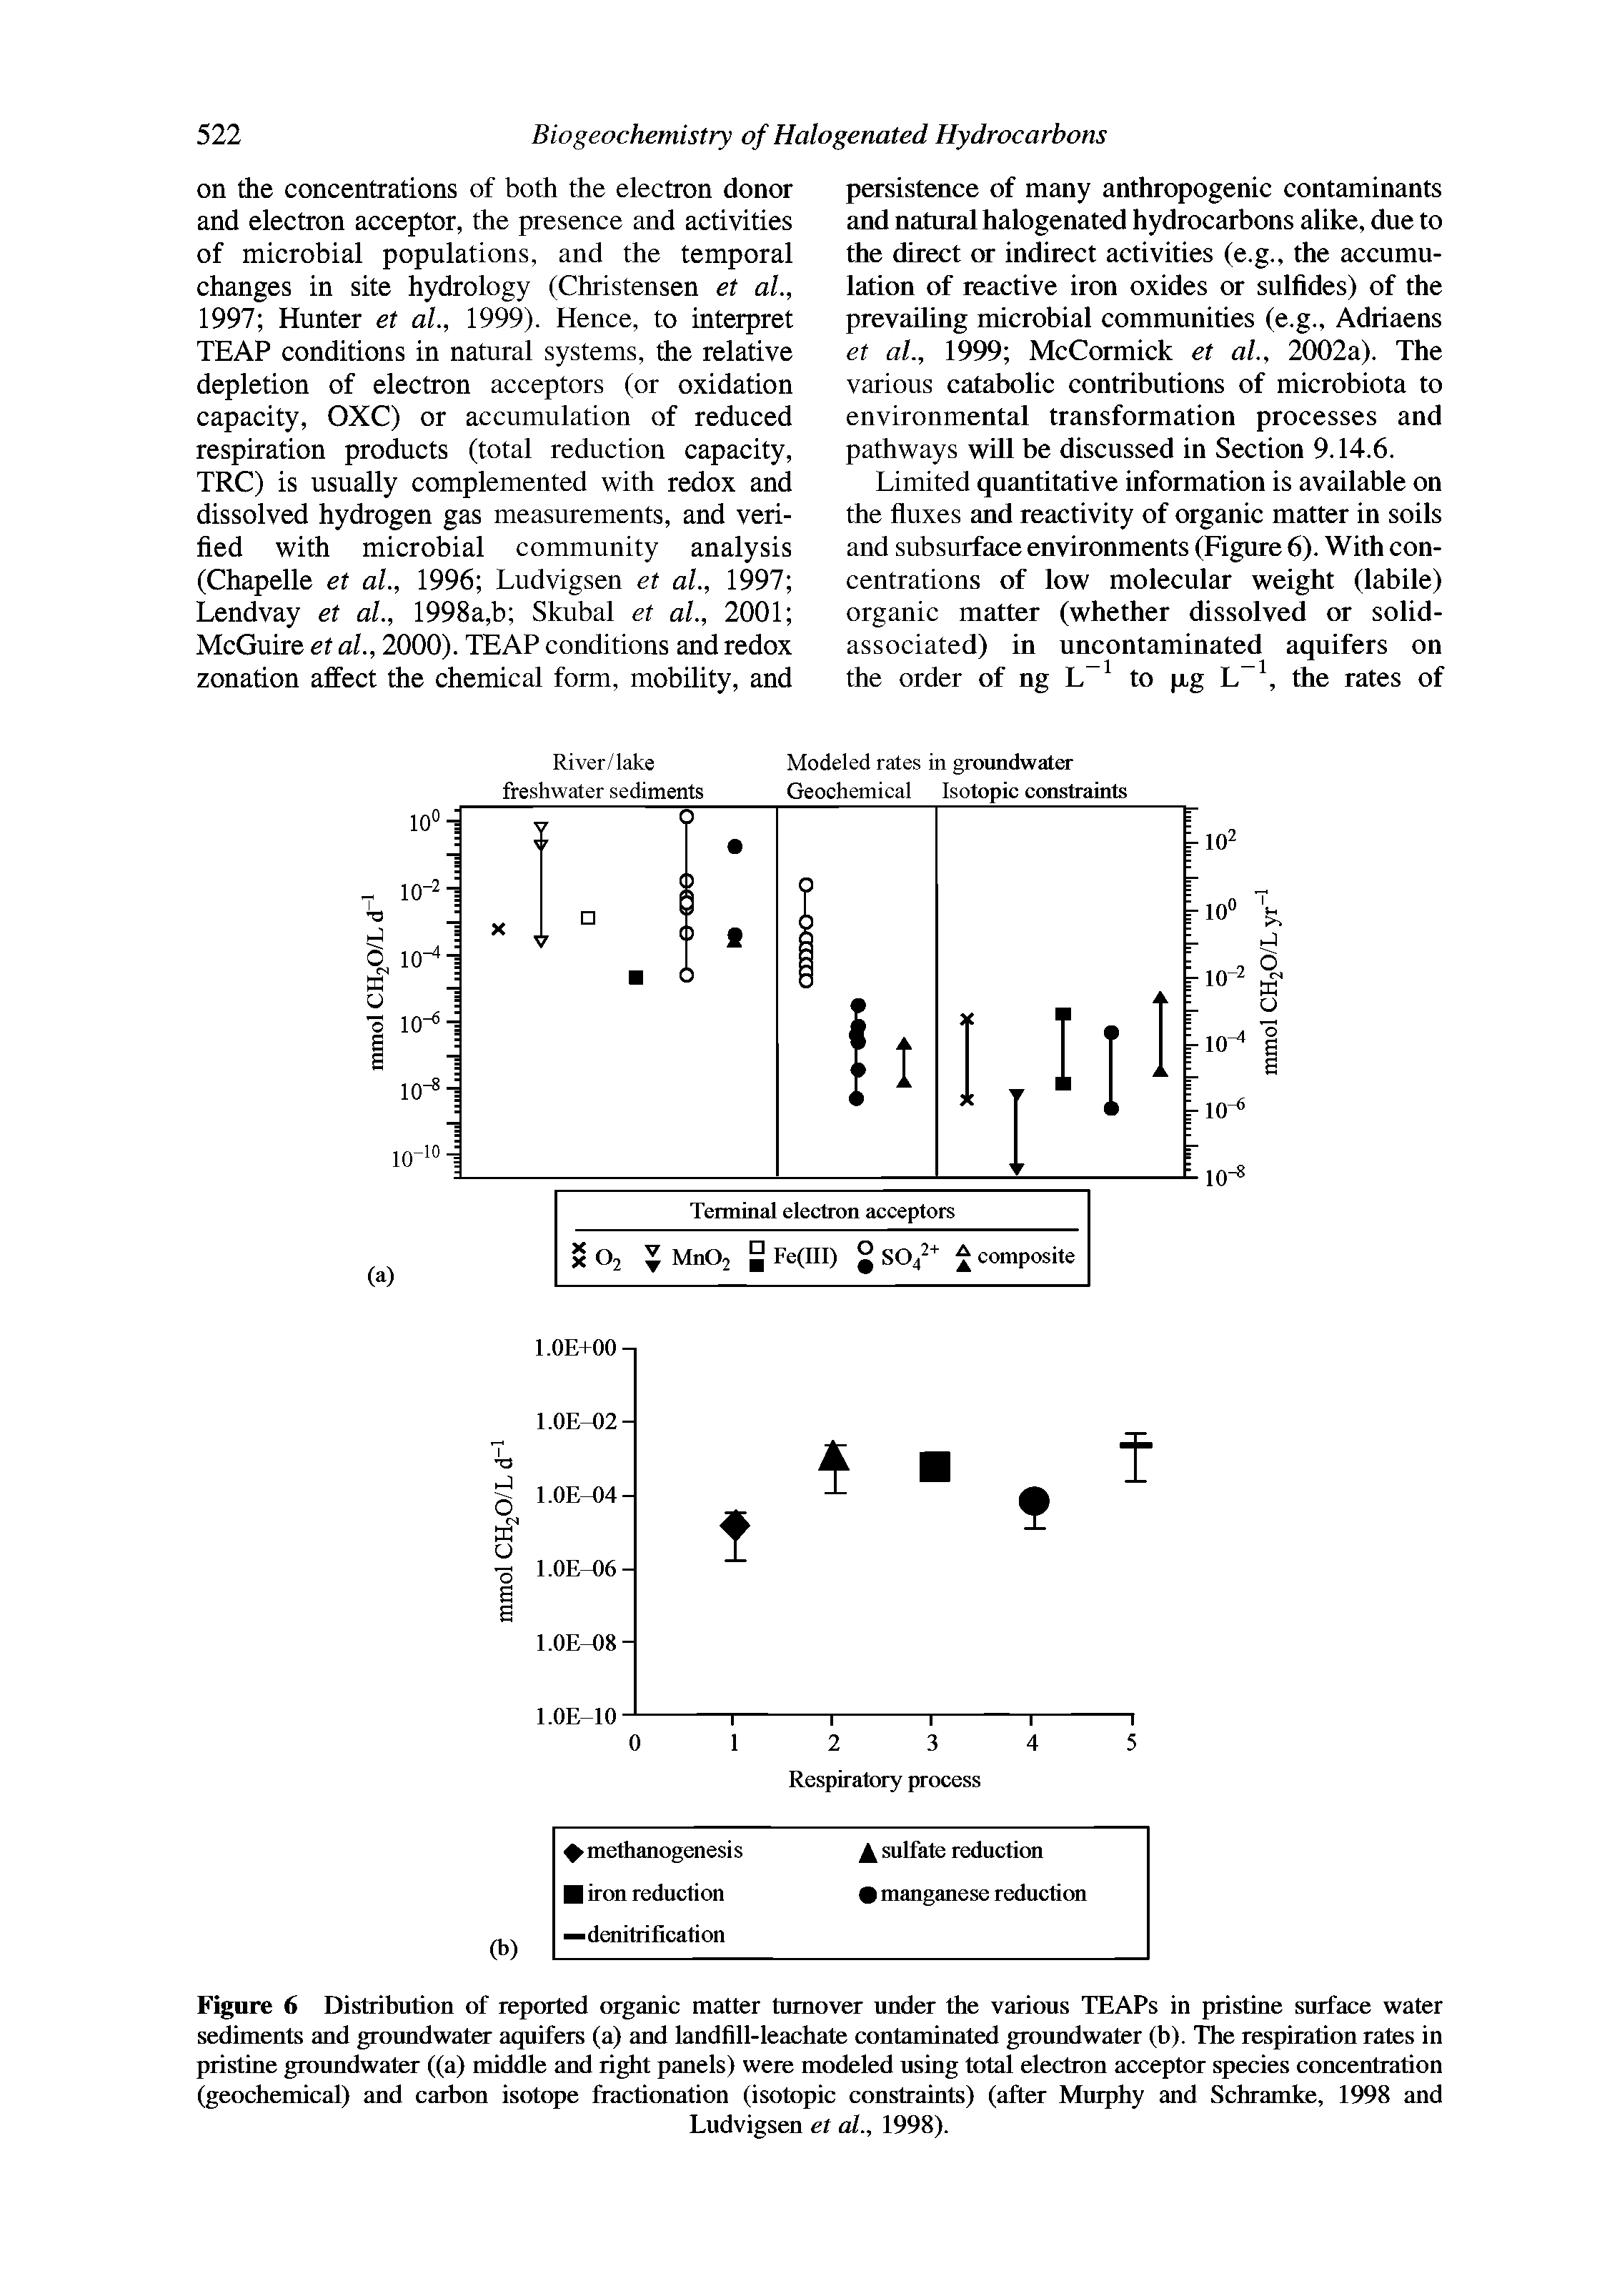 Figure 6 Distribution of reported organic matter turnover under the various TEAPs in pristine surface water sediments and groundwater aquifers (a) and landfill-leachate contaminated groundwater (b). The respiration rates in pristine groundwater ((a) middle and right panels) were modeled using total electron acceptor species concentration (geochemical) and carbon isotope fractionation (isotopic constraints) (after Murphy and Schramke, 1998 and...